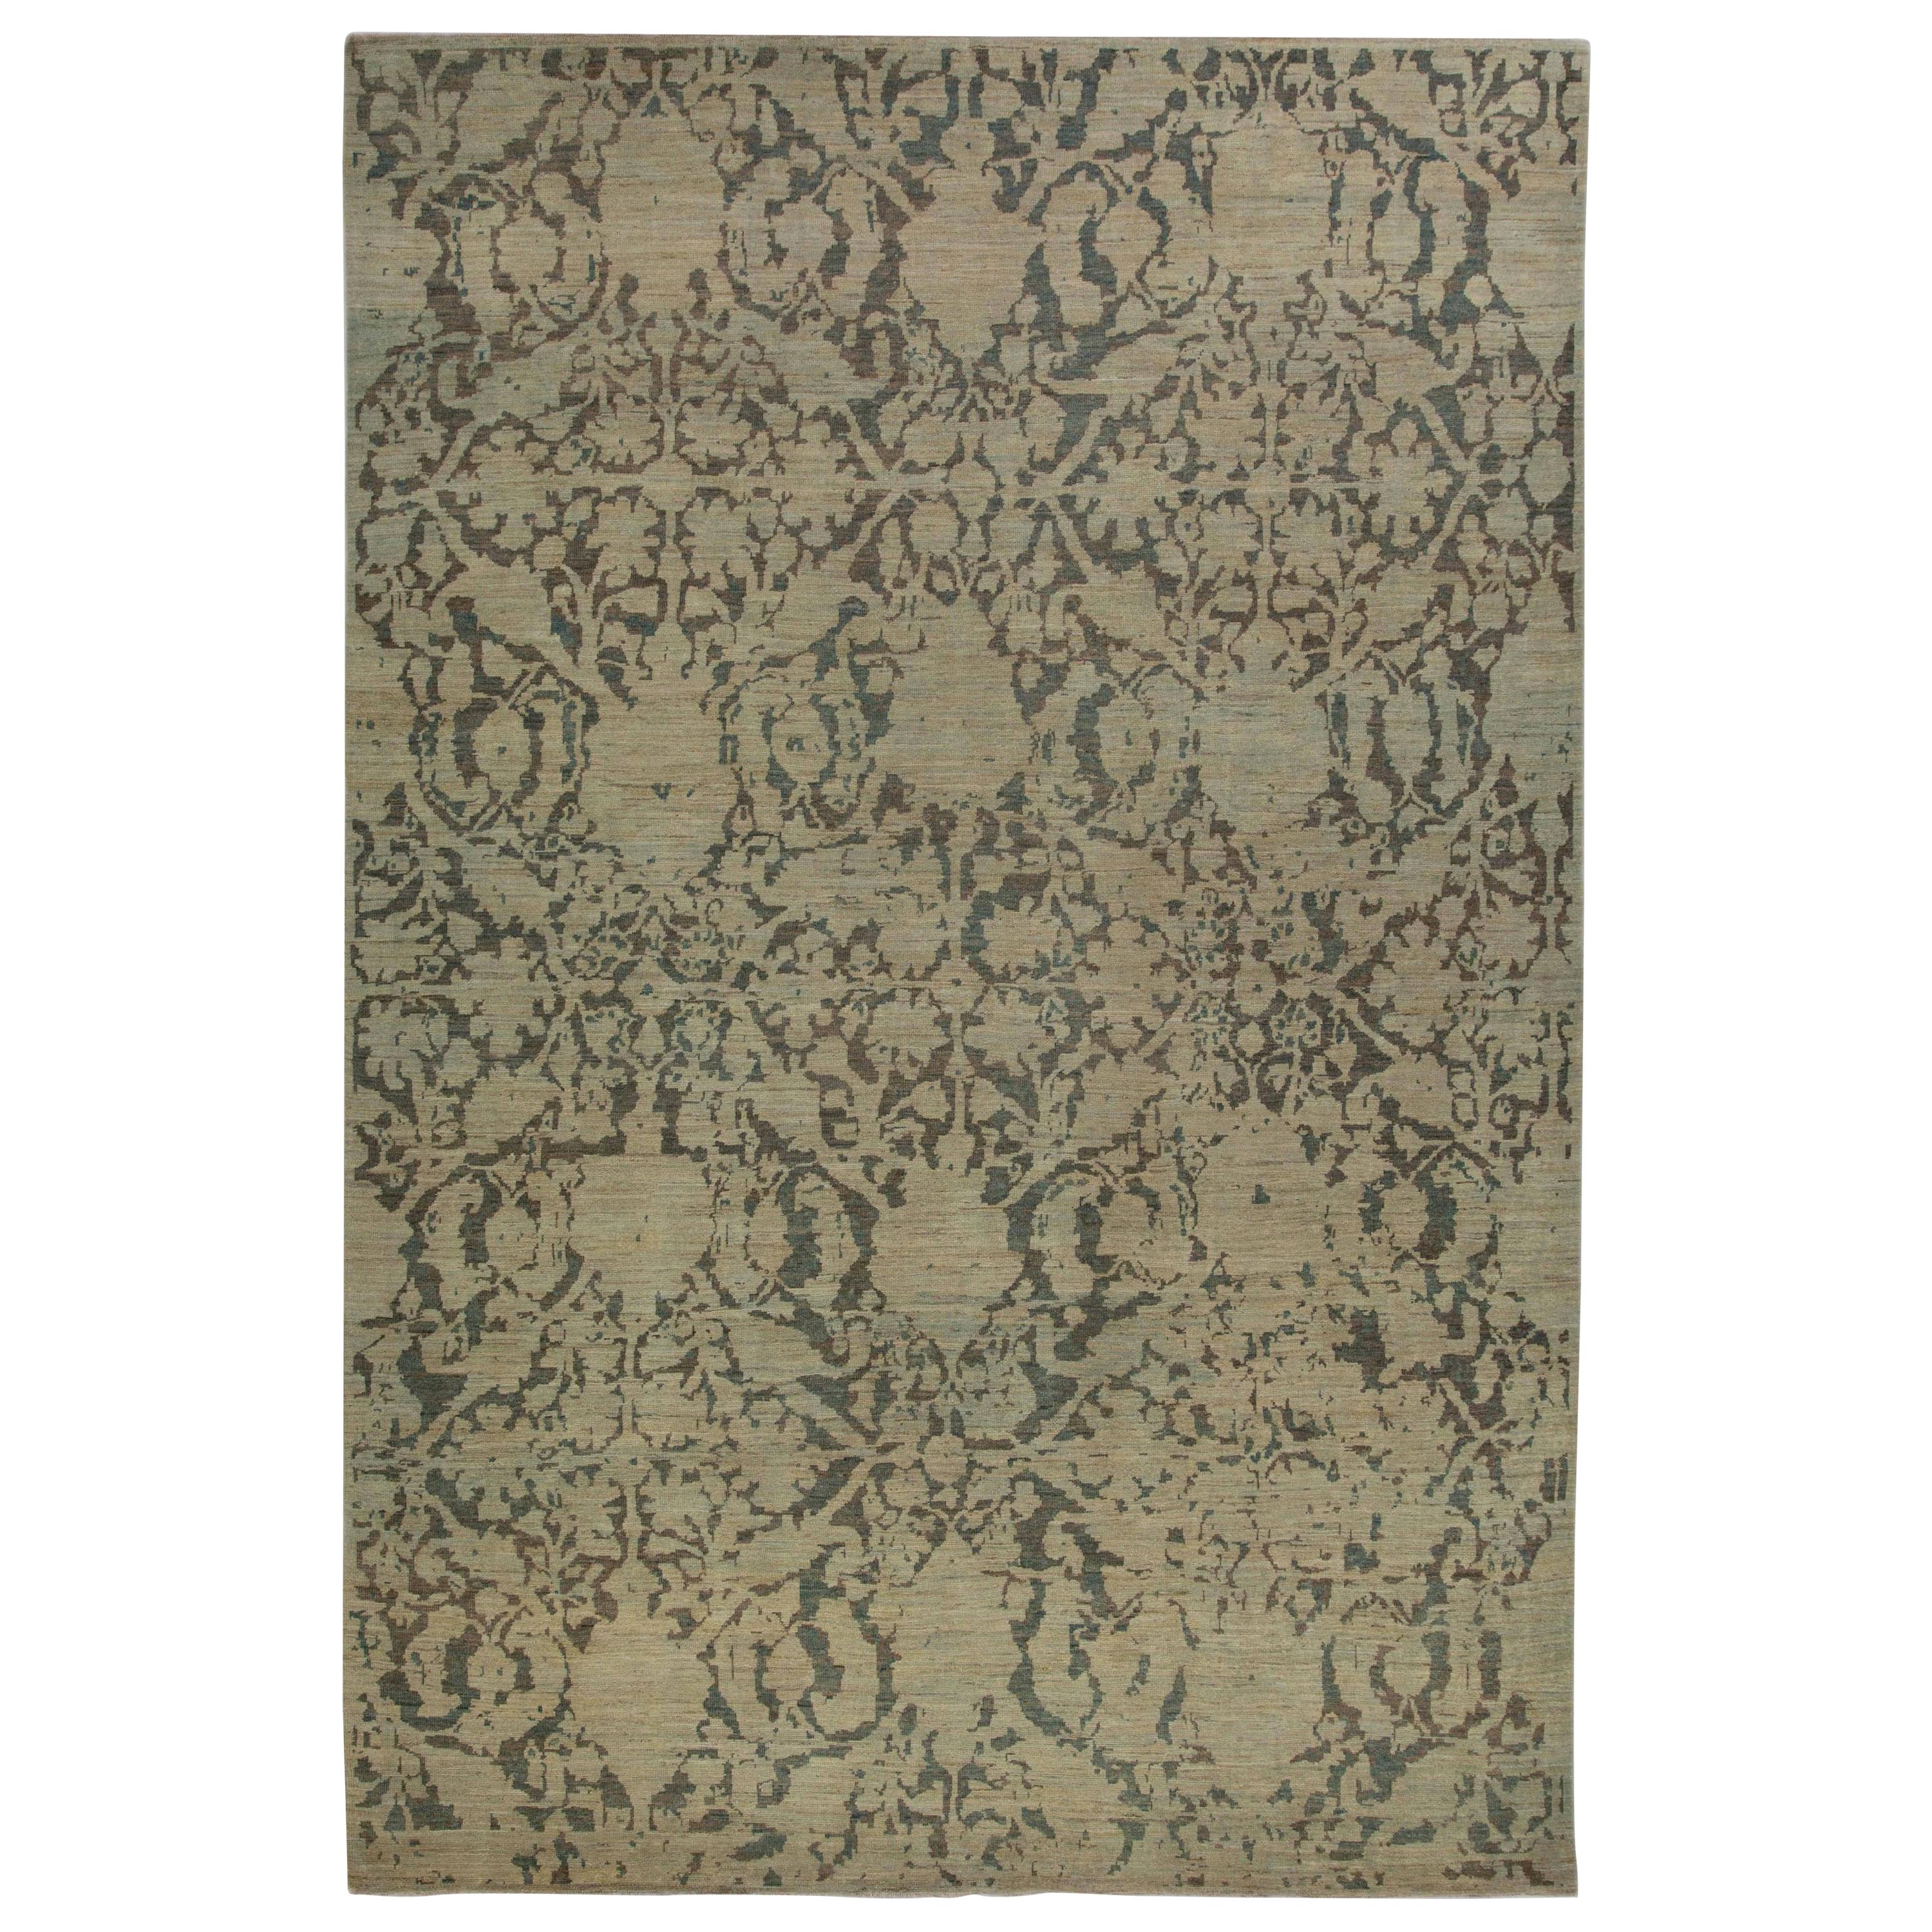 Contemporary Turkish Rug Sultanabad Style with Large Flower Heads Design For Sale